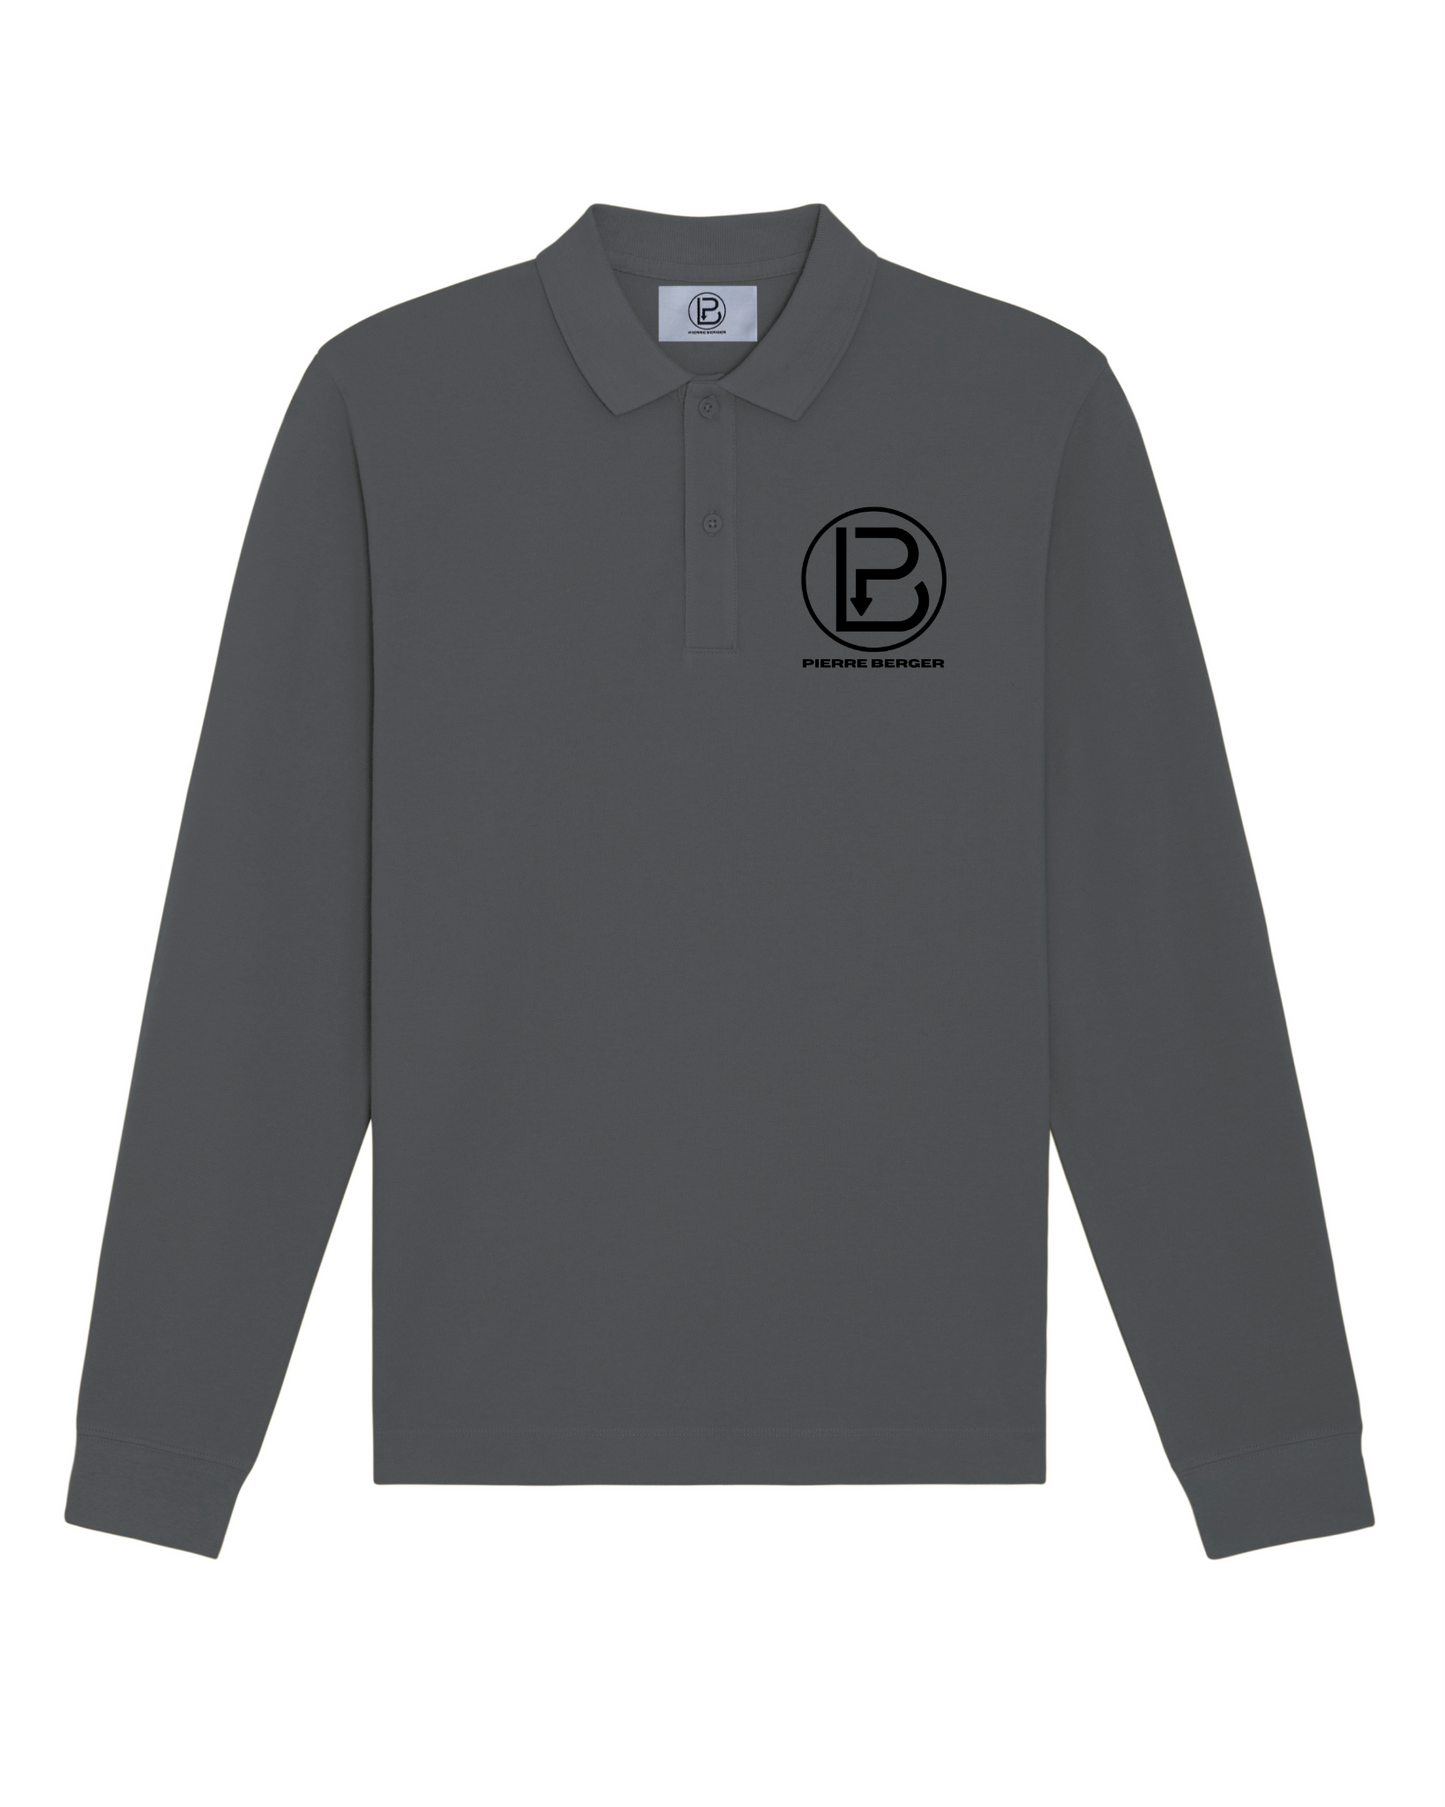 PIERRE BERGER - 100% organic cotton unisex long-sleeved polo shirt embroidery